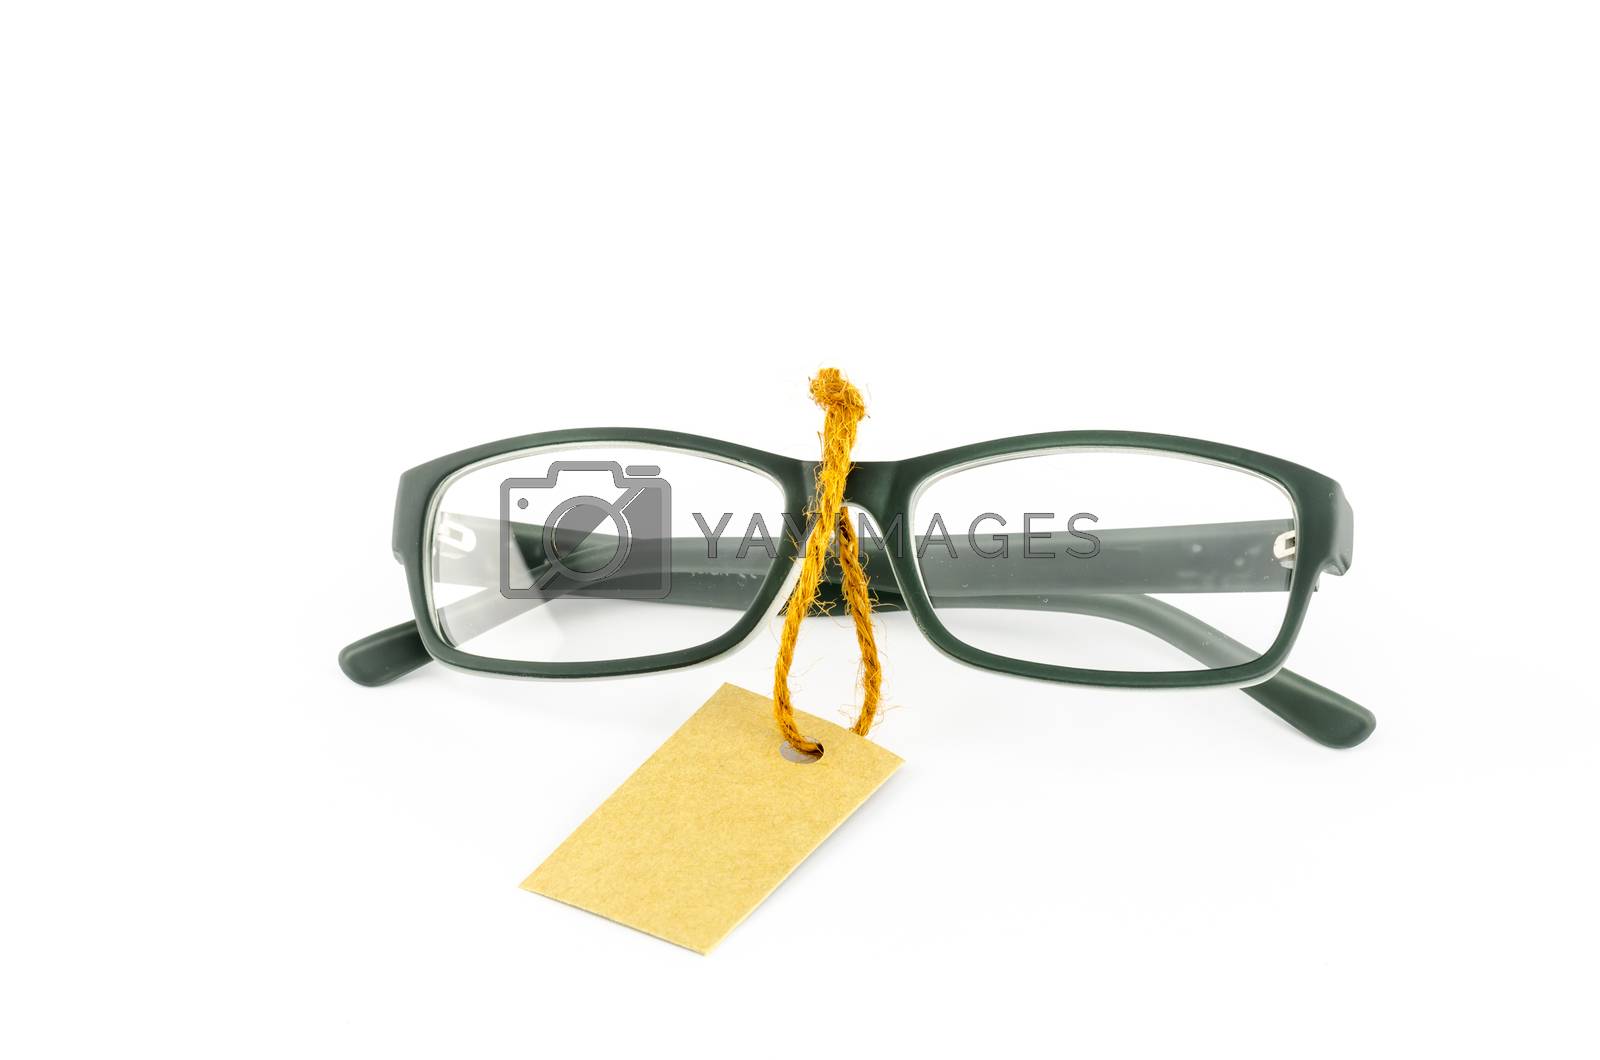 Royalty free image of glasses and cost tag by ammza12